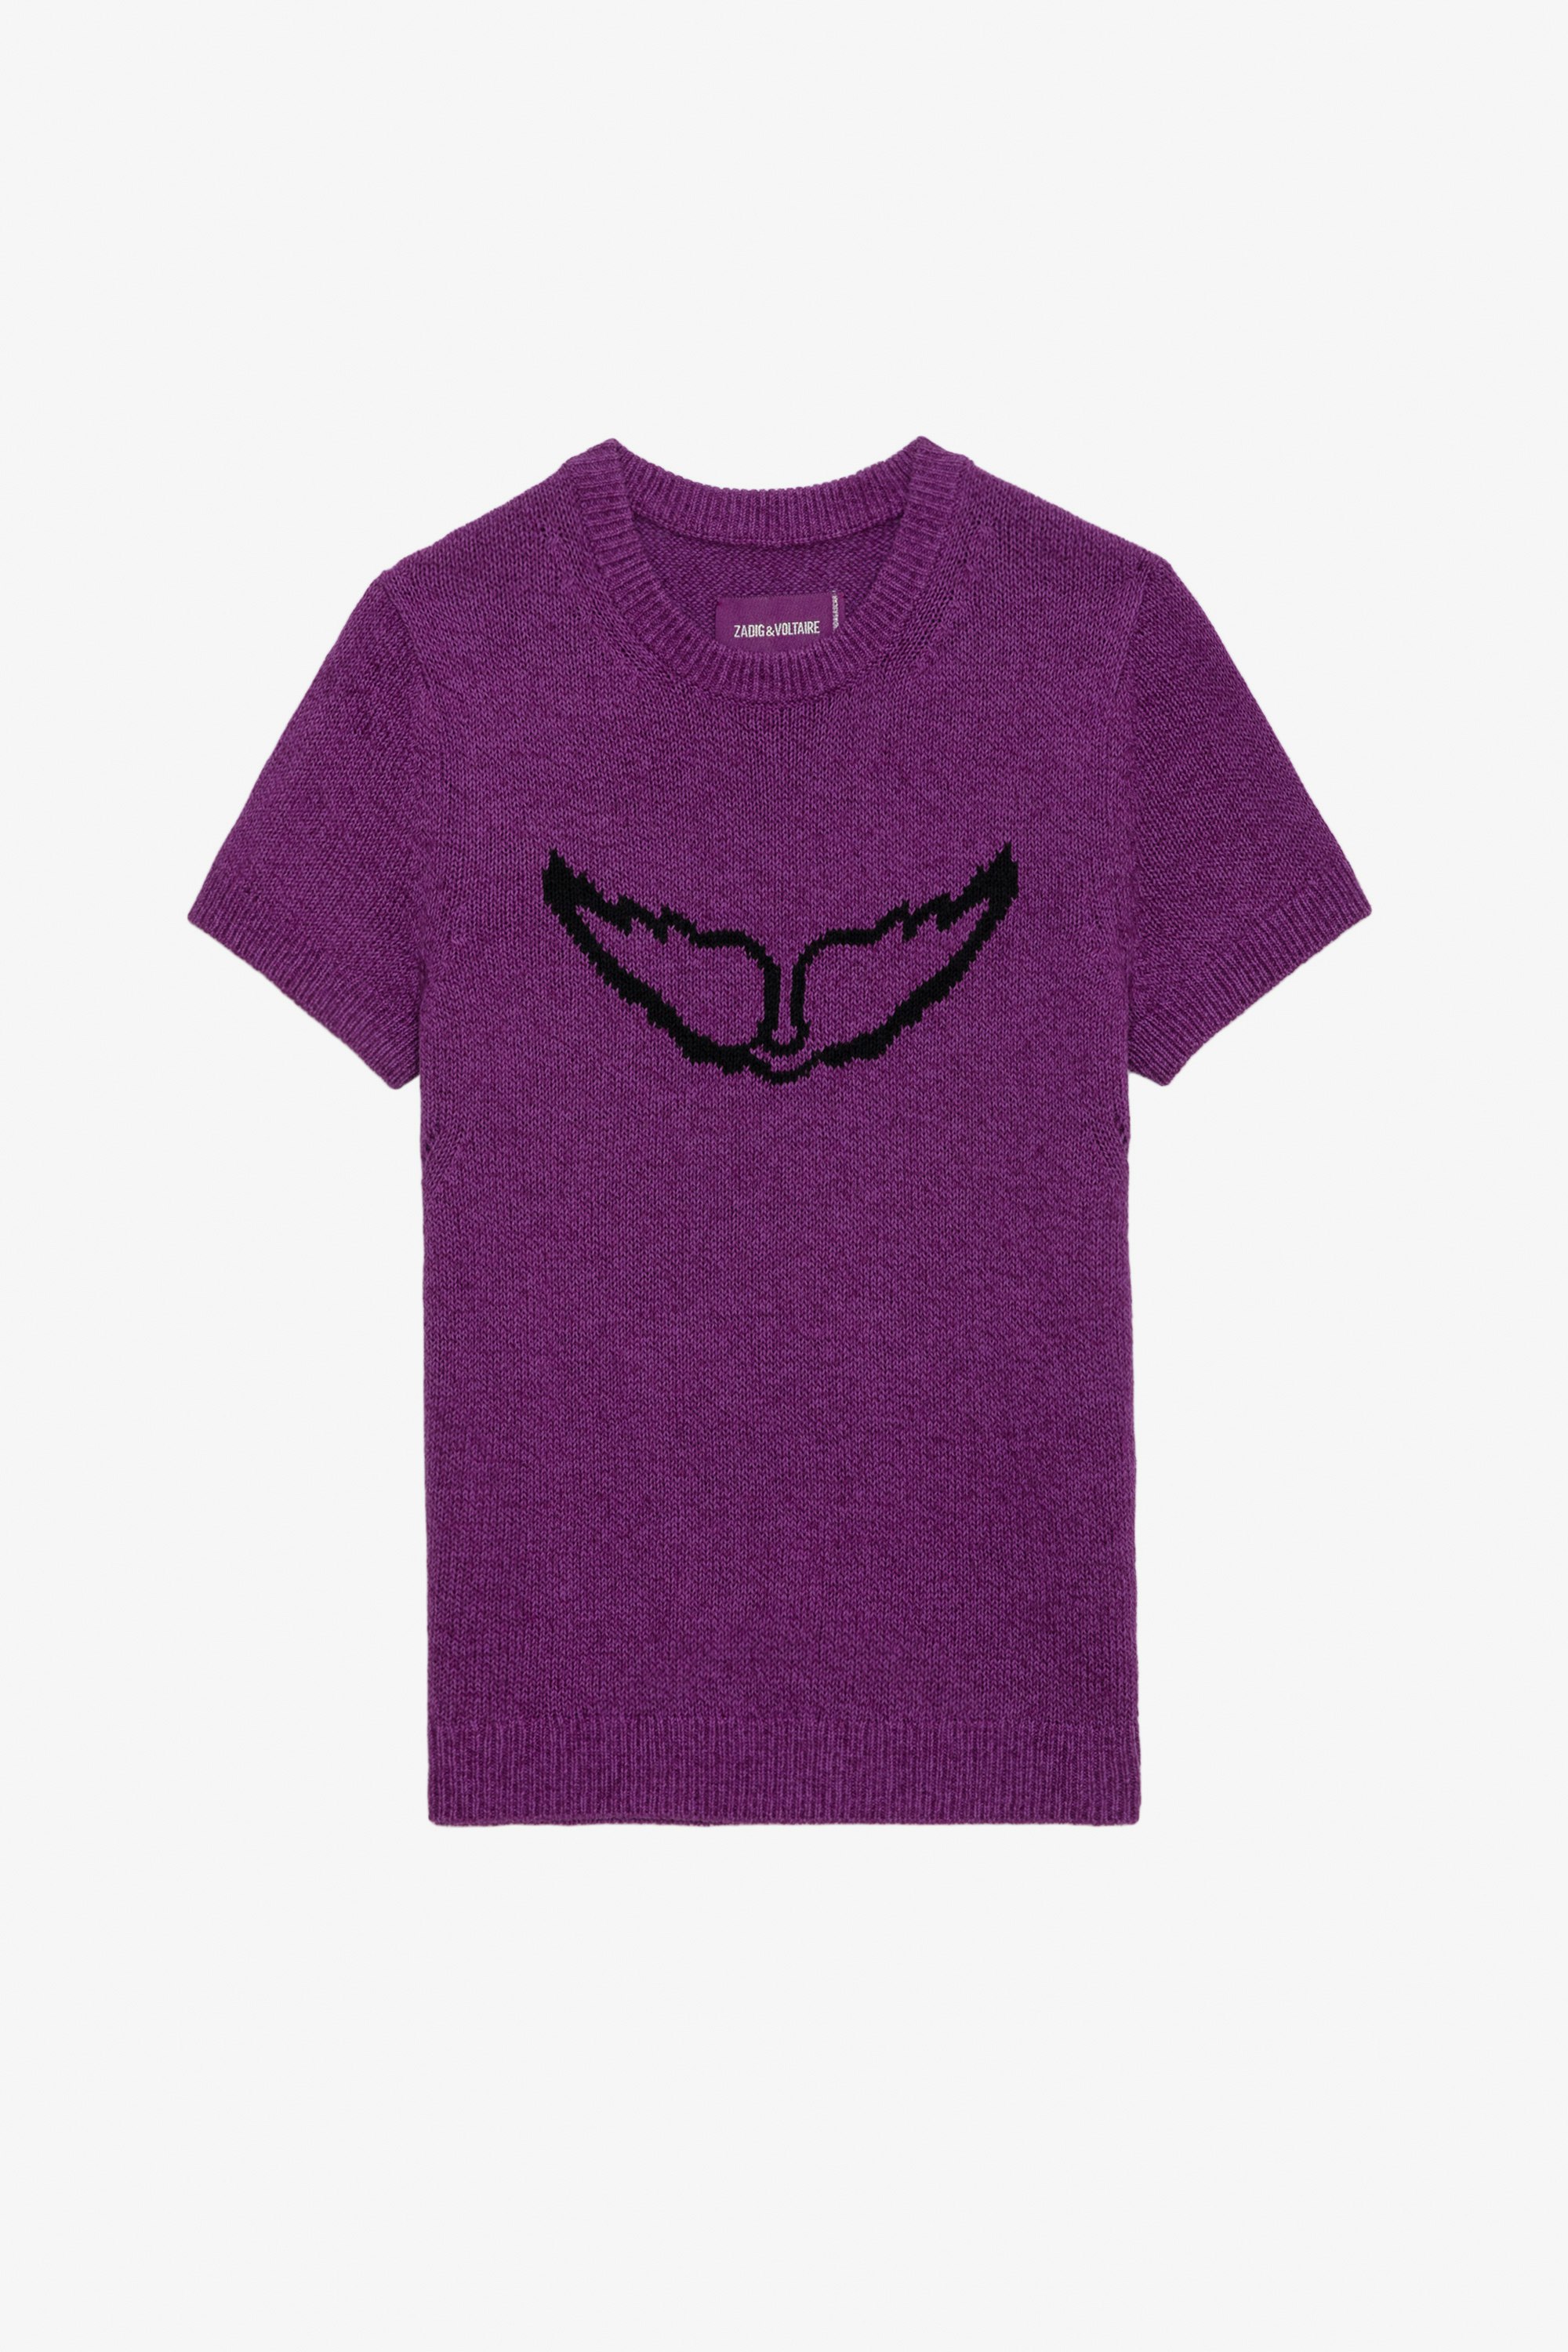 Sorly Wings Jumper - Purple linen and cotton short-sleeved jumper with intarsia jacquard wings.